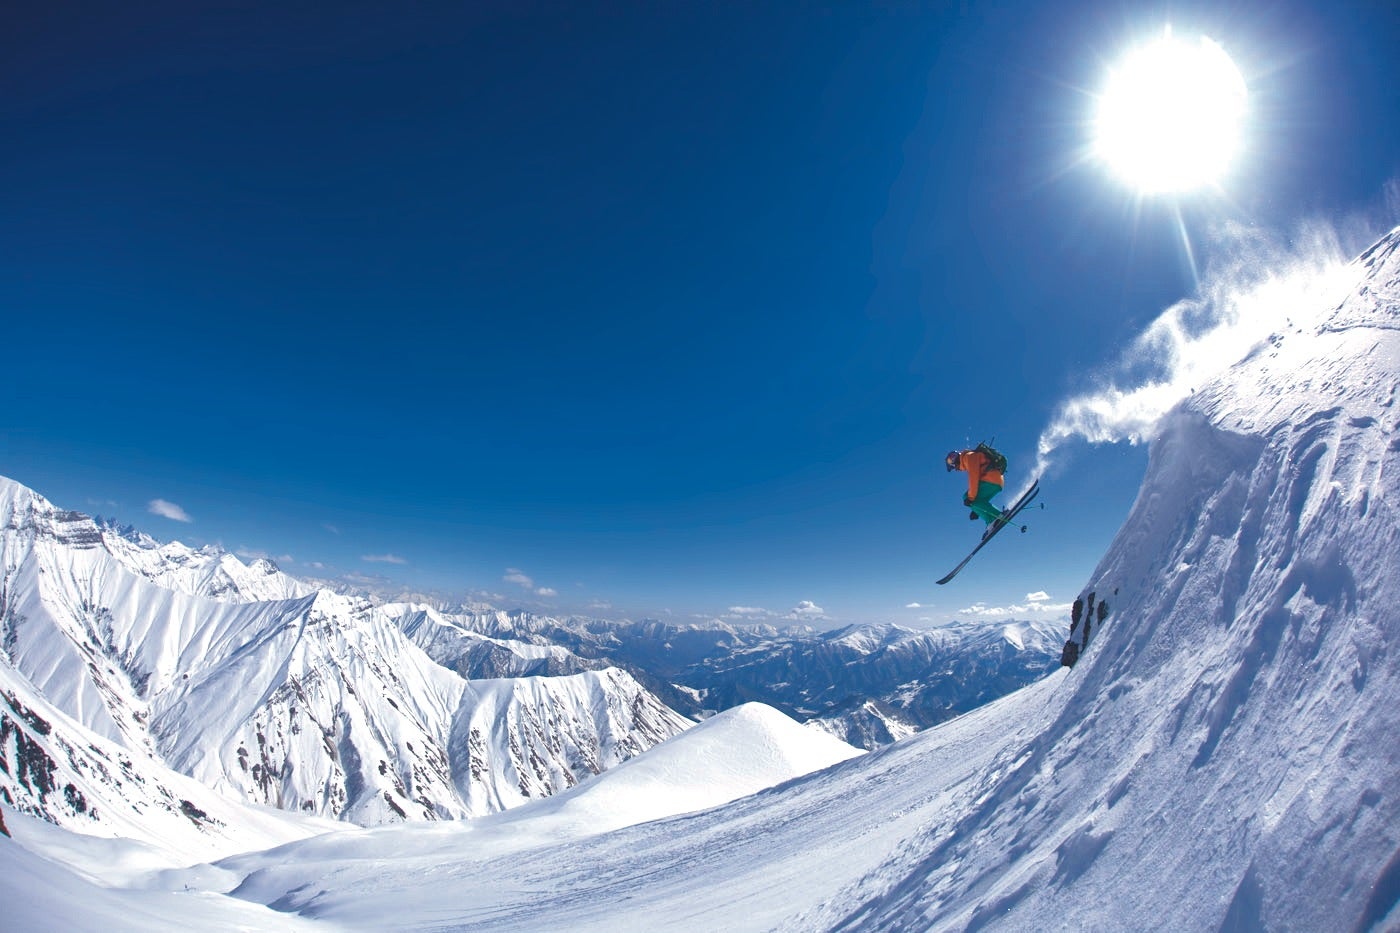 Tetnuldi is at the forefront of the modern freeride scene in the country